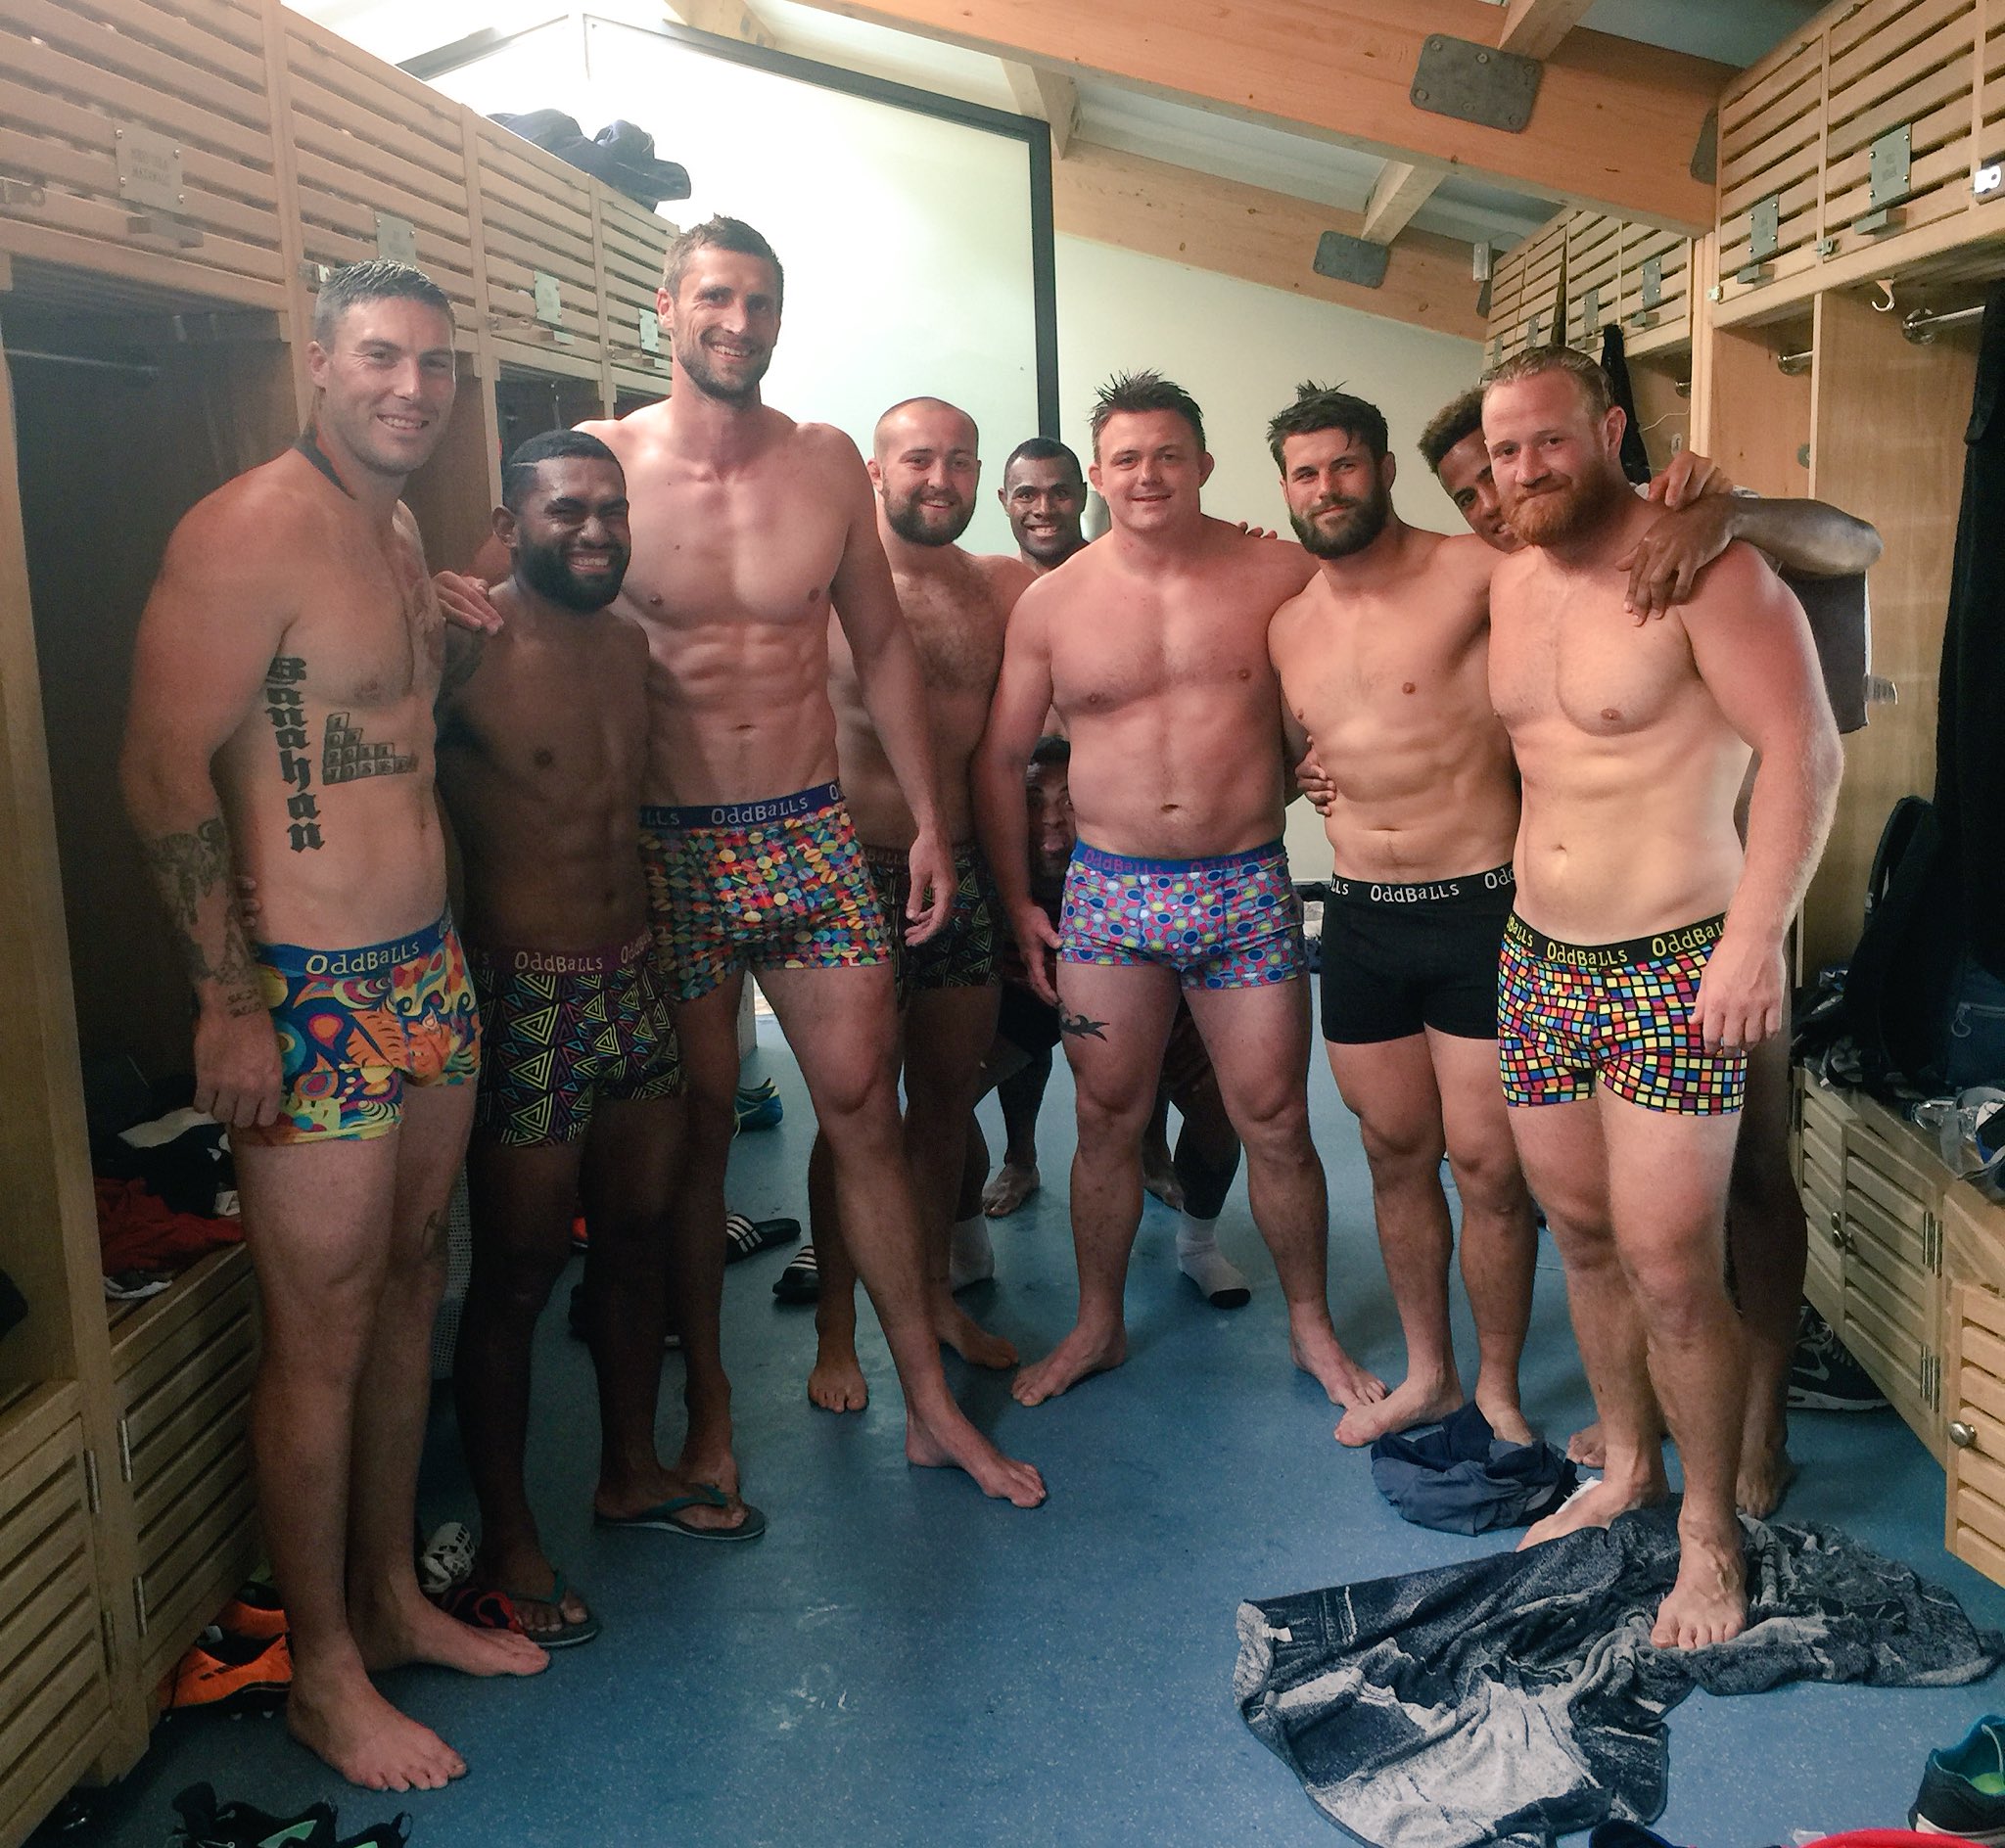 OddBalls on X: The @bathrugby players are ready! New season, new